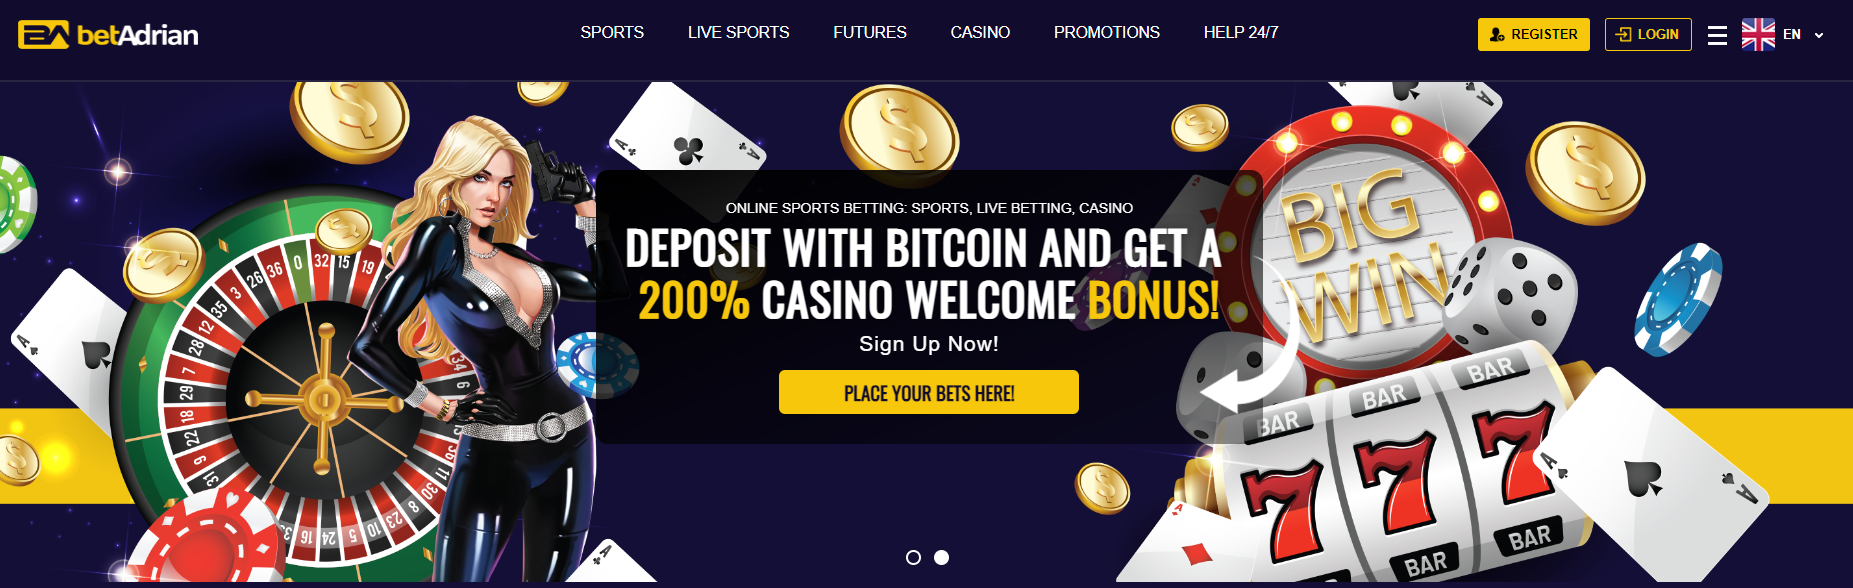 play bitcoin casino game For Dollars